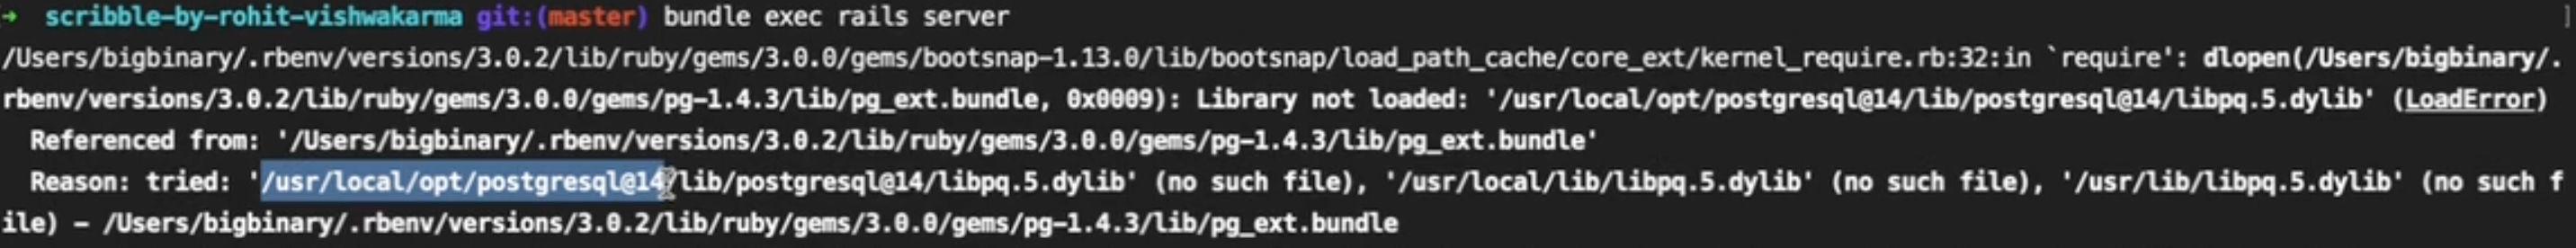 Library not loaded error